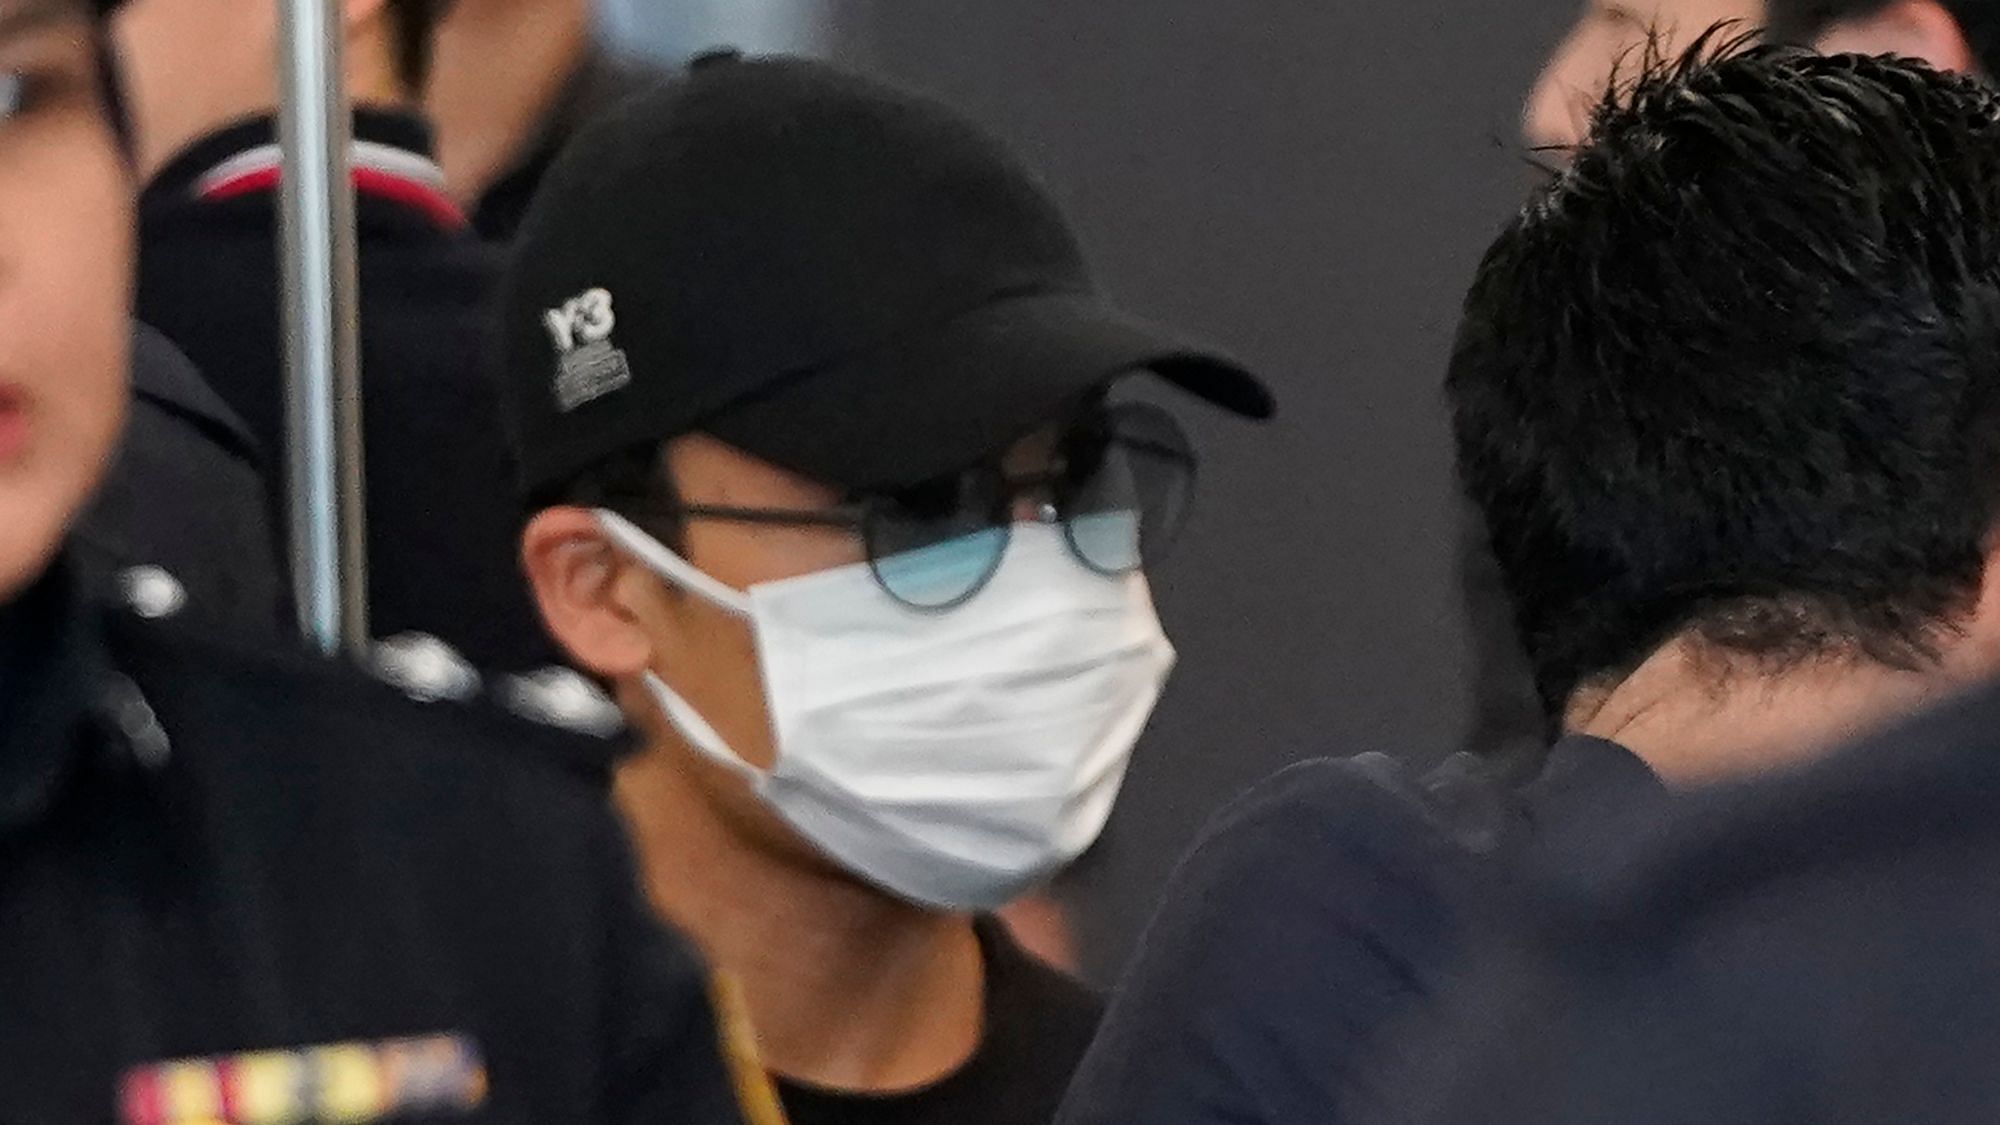 Momota, wearing a dark cap and a face mask, left on a Malaysian Airlines flight to Tokyo’s Narita airport at 9:40 am (0140 GMT).